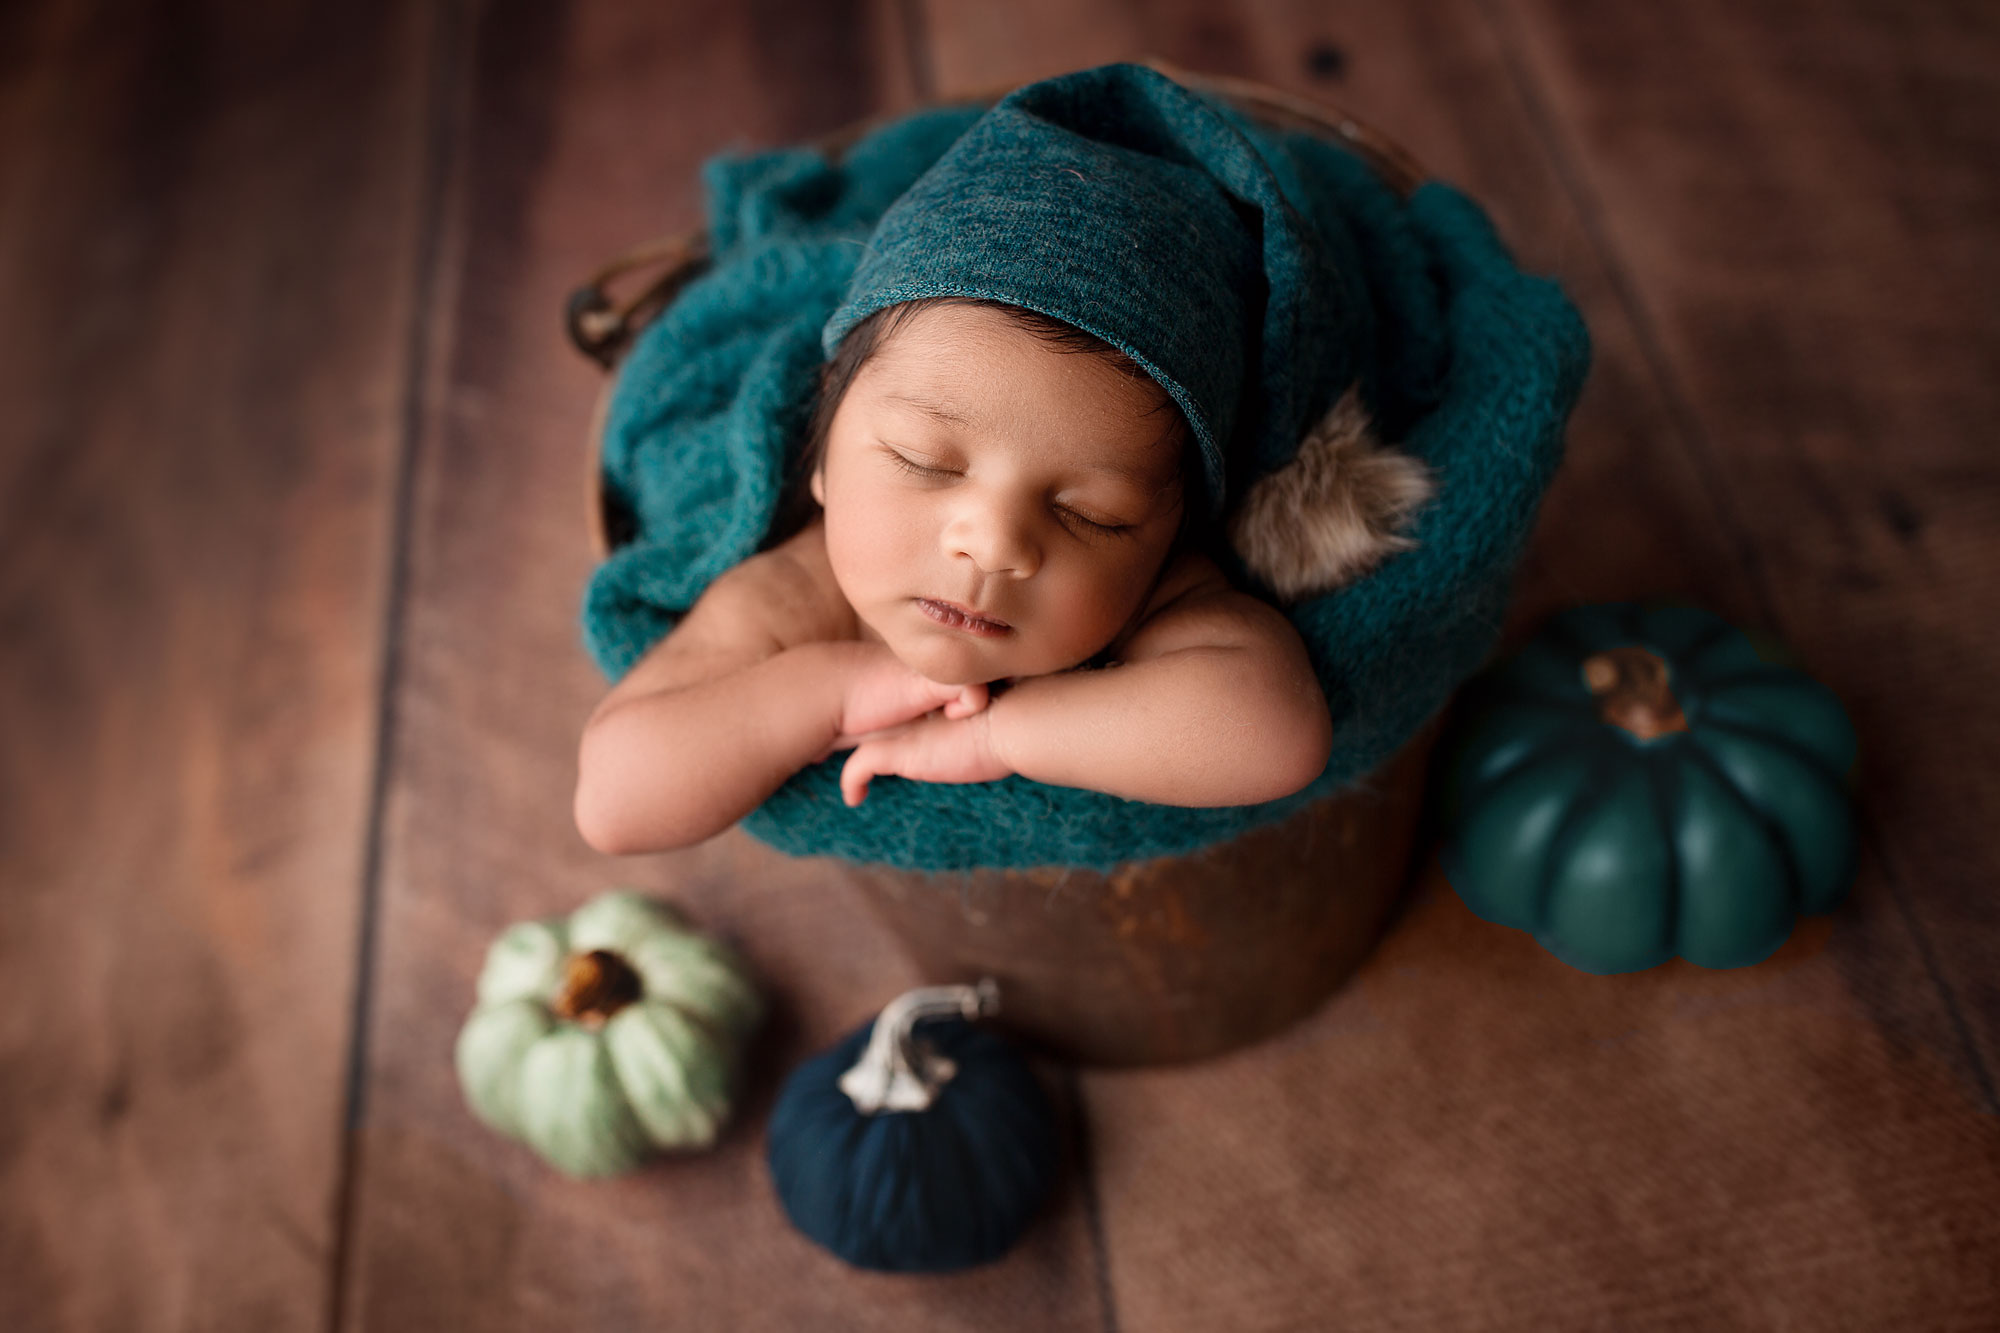 professional newborn photos near me, baby asleep in bucket with blue cap and blue pumpkins